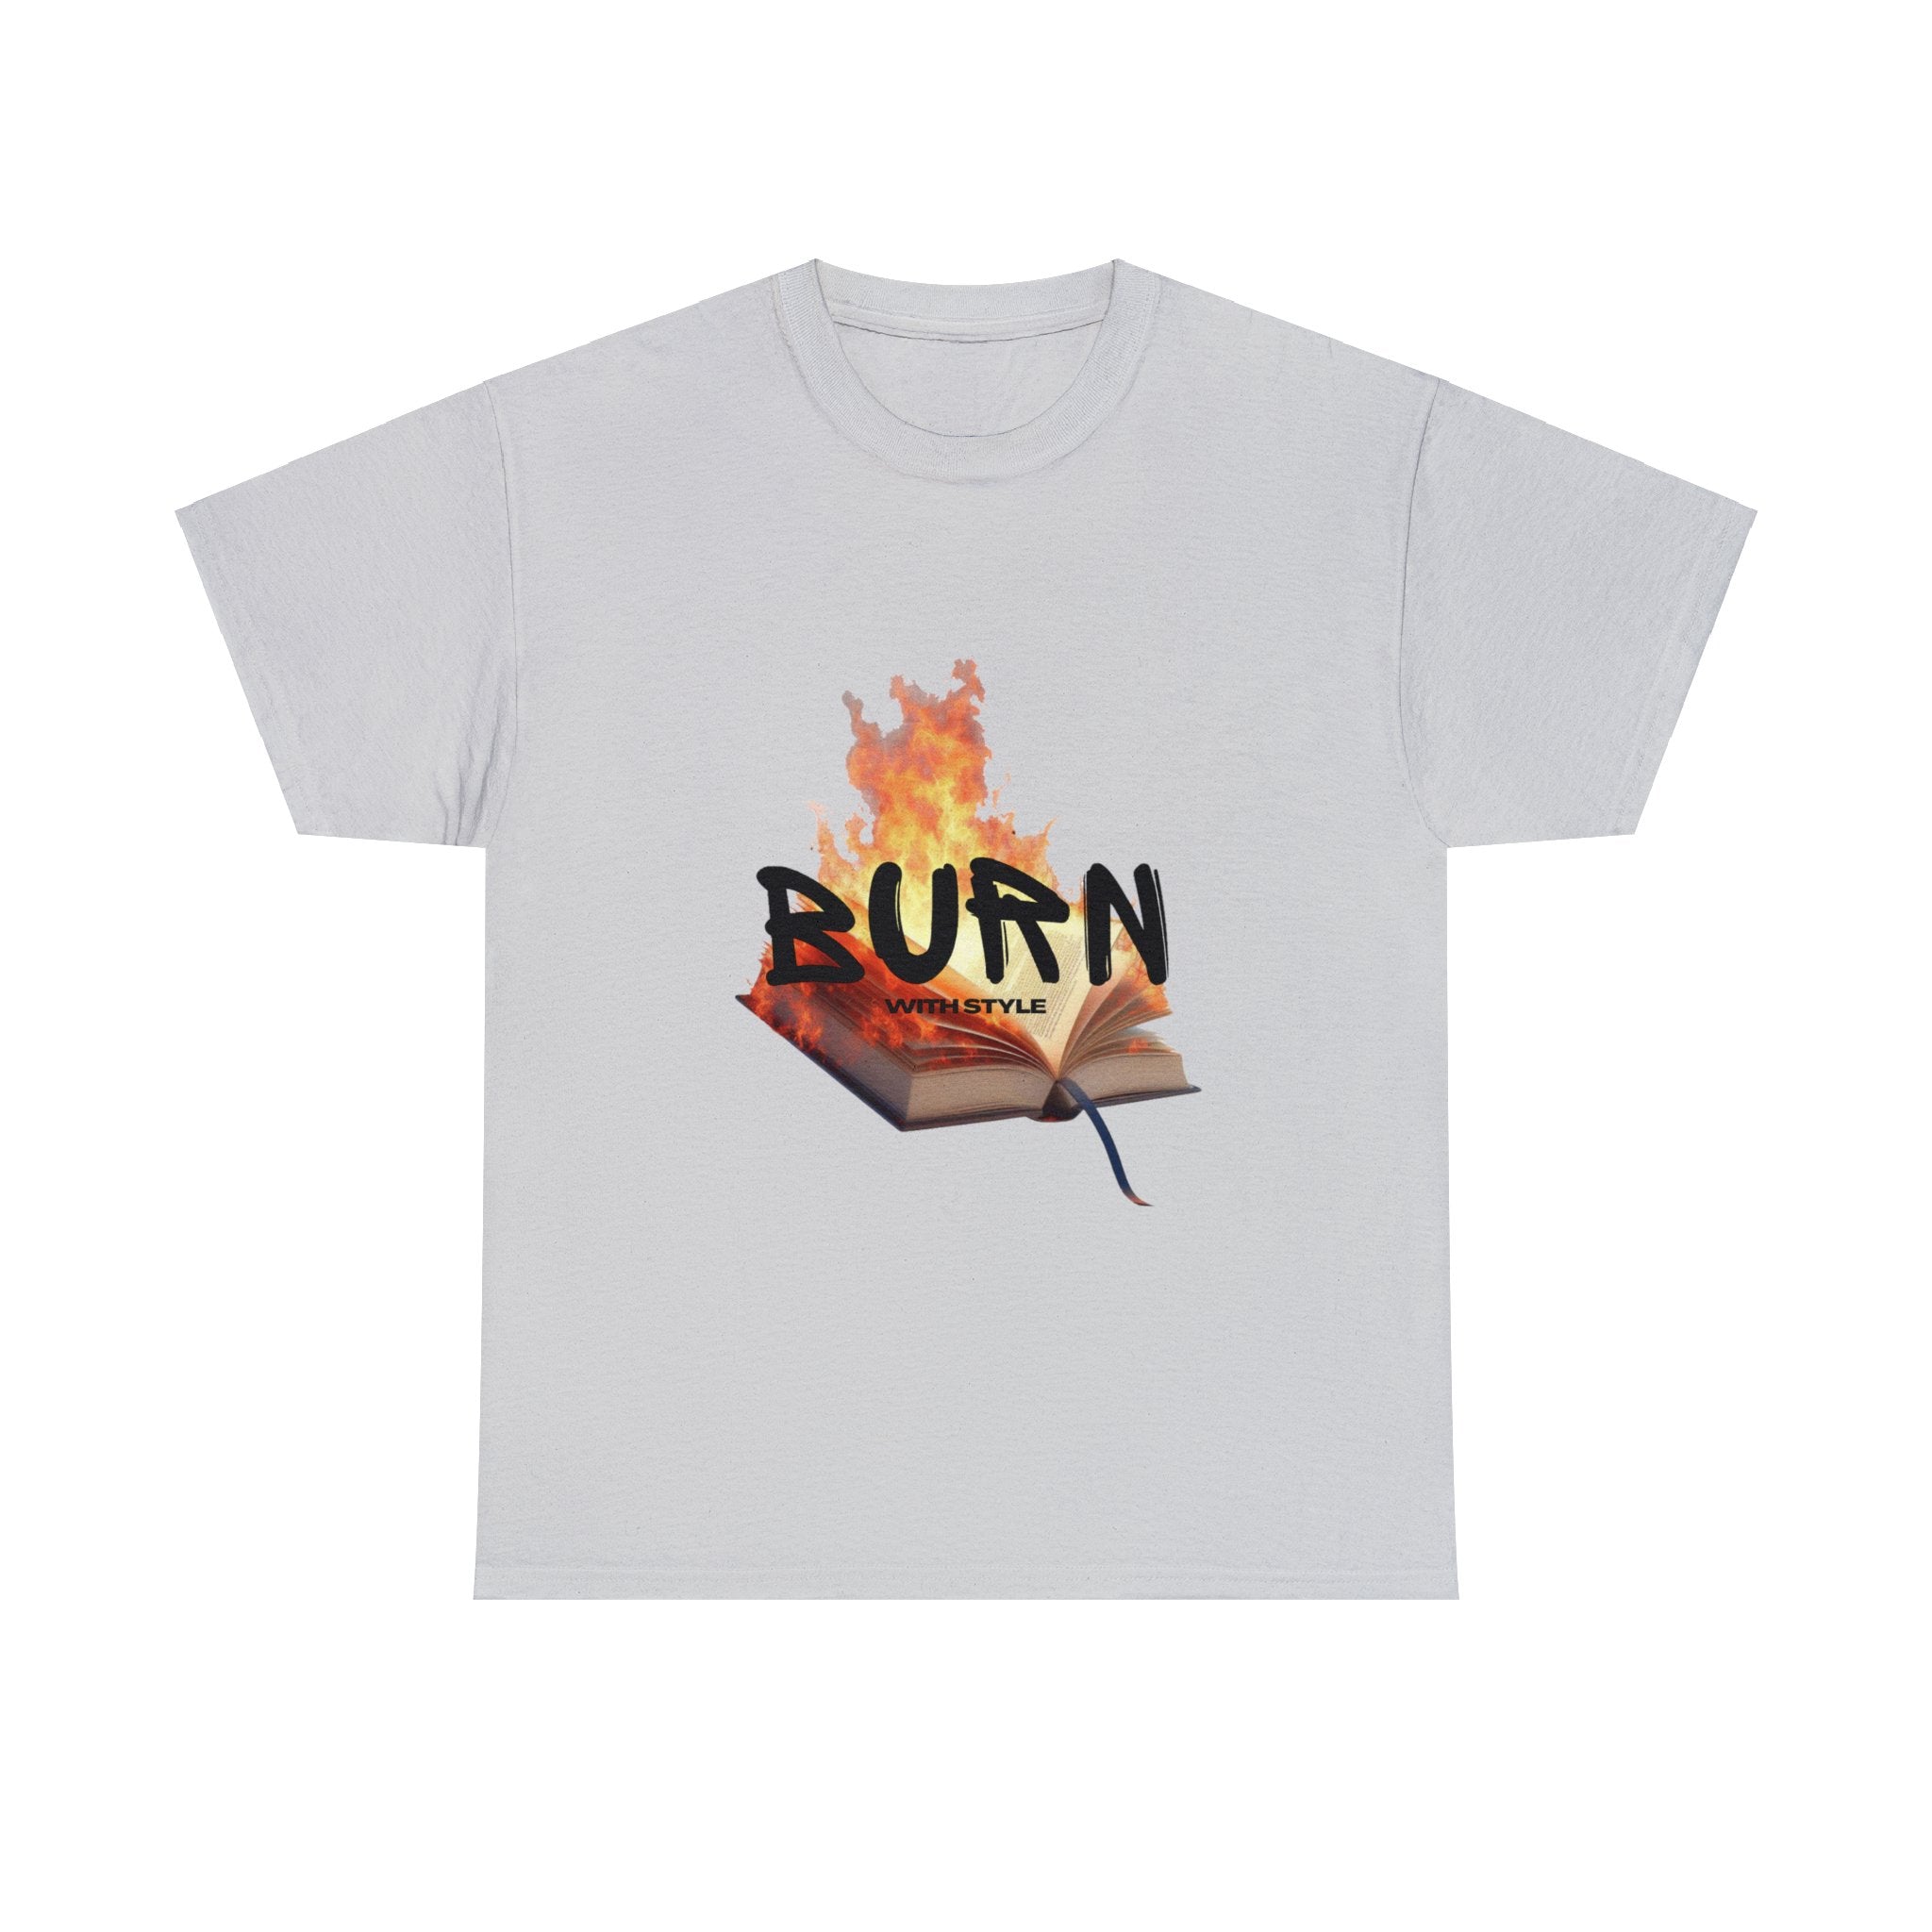 Burn With Style T-Shirt